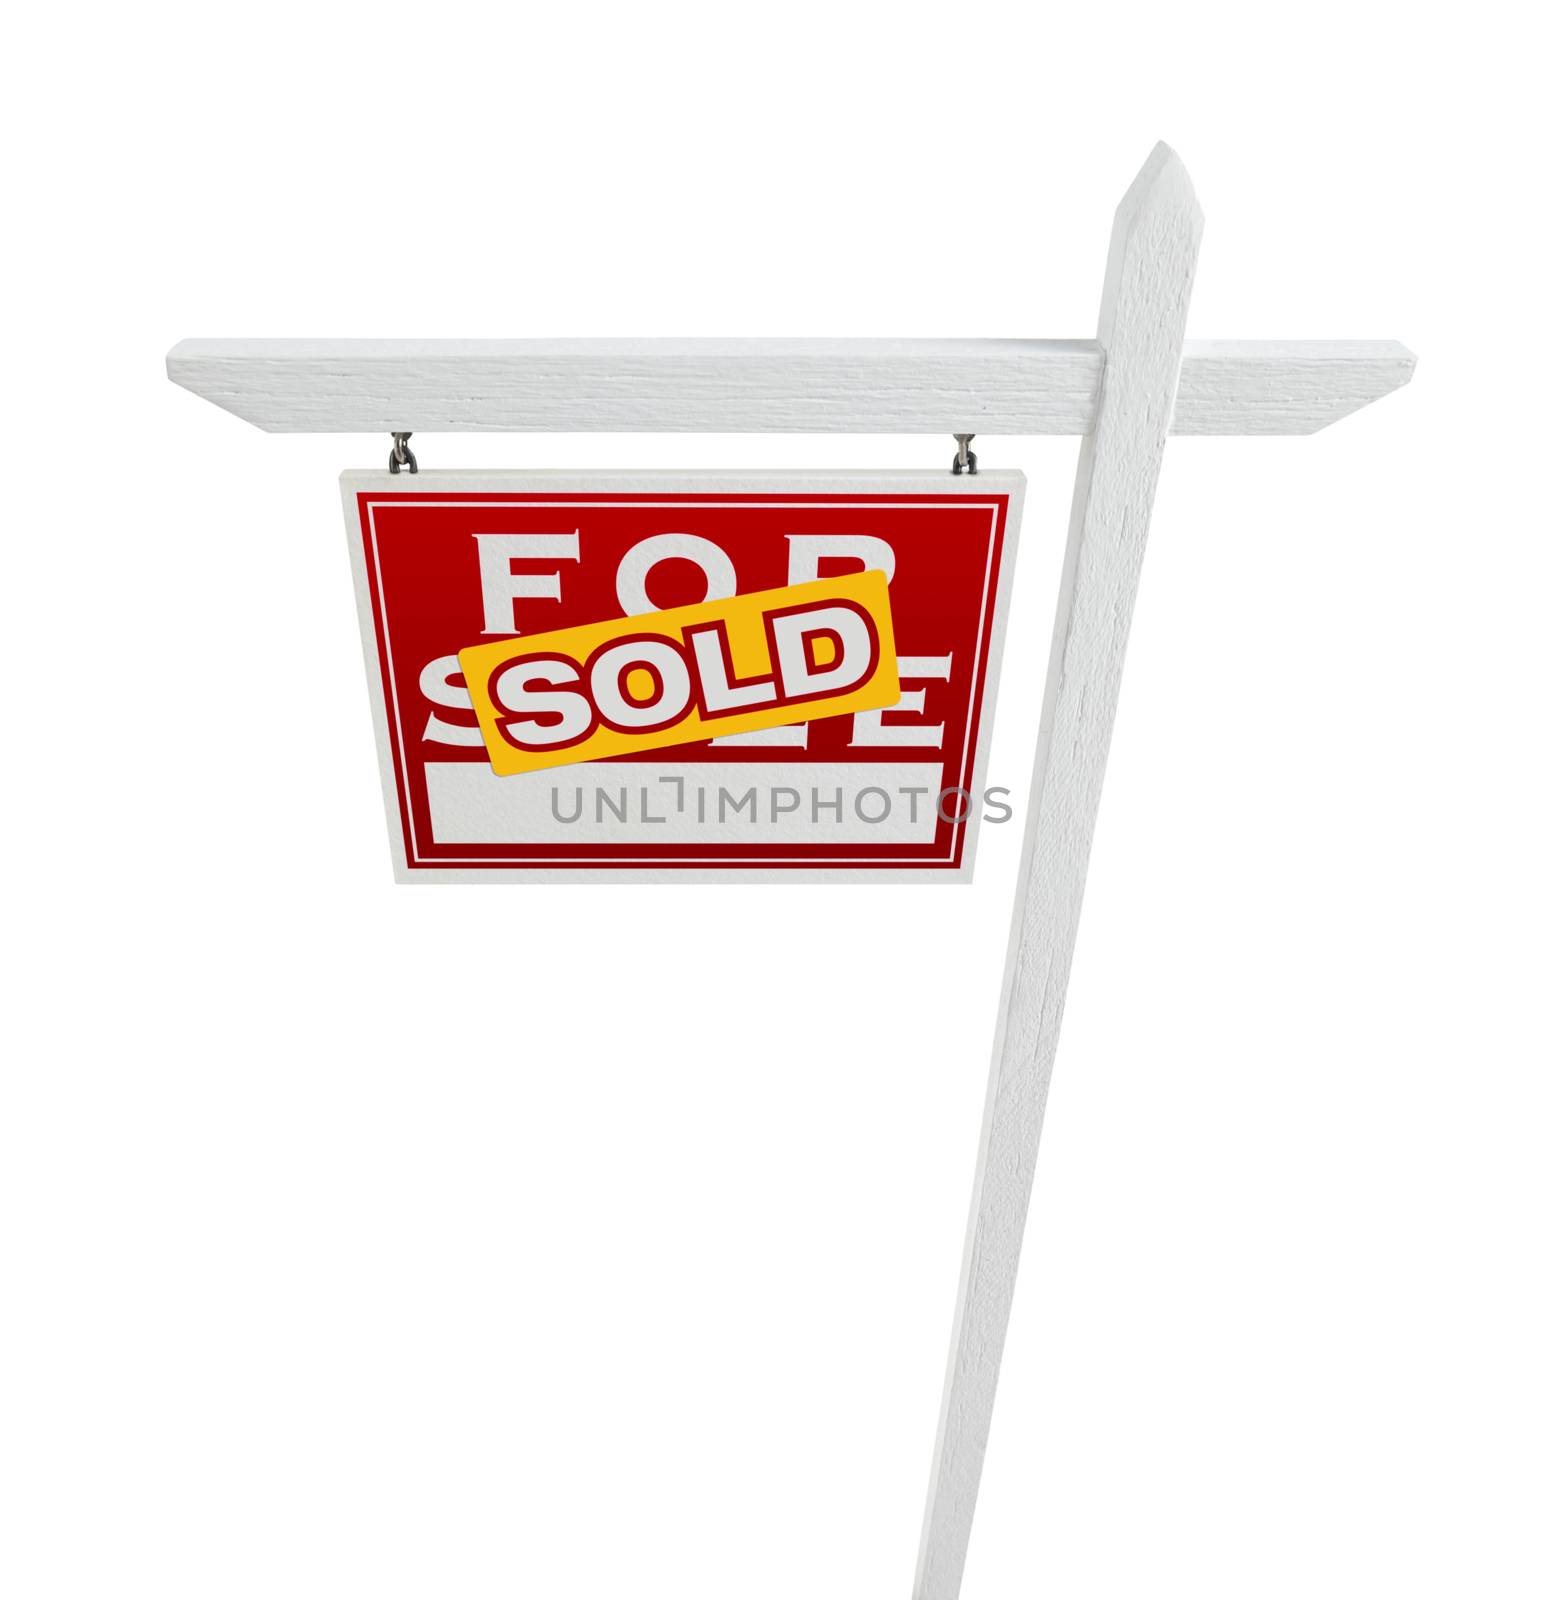 Left Facing Sold For Sale Real Estate Sign Isolated on a White B by Feverpitched